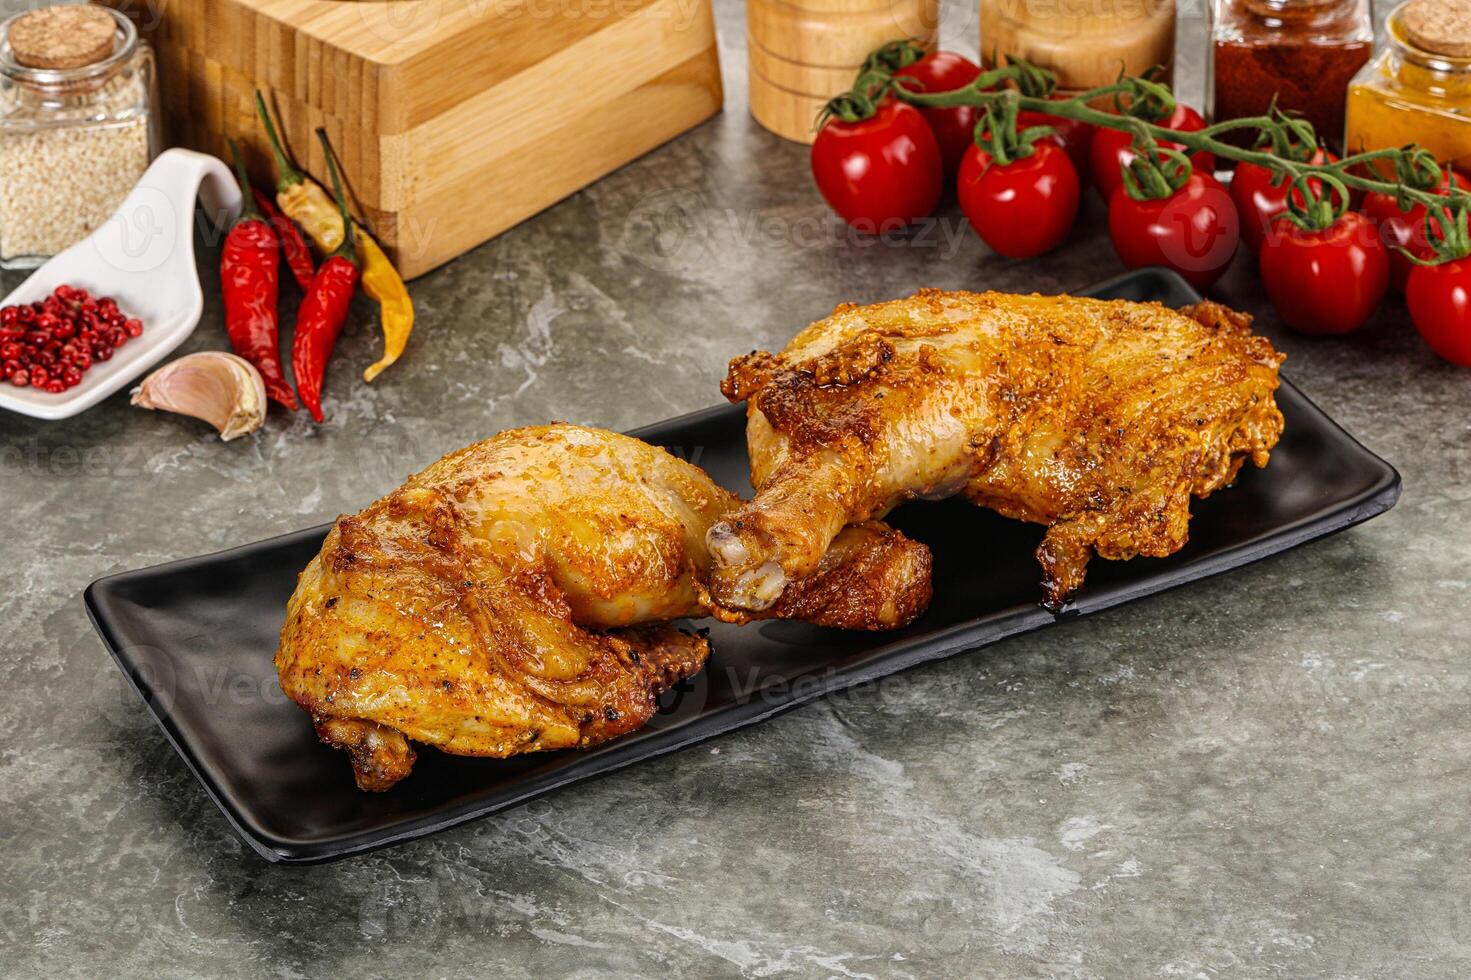 Roasted chicken leg with spices photo